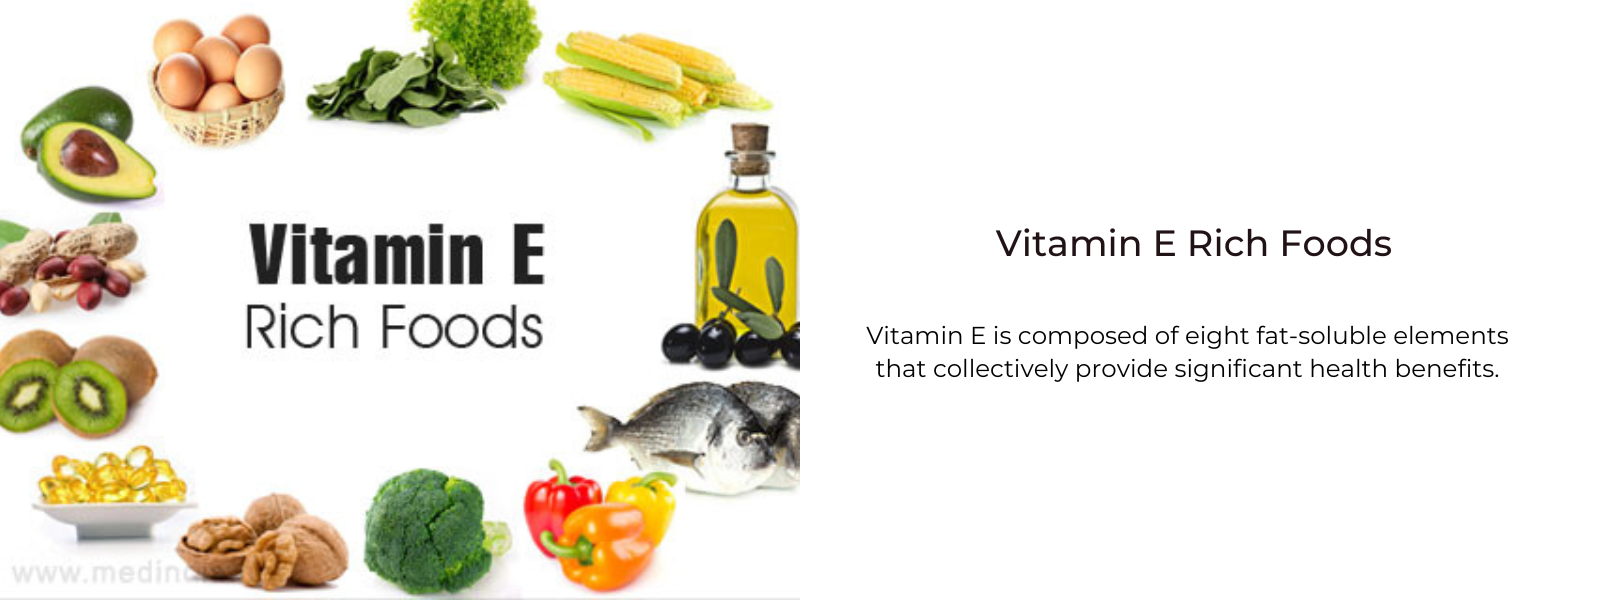 Vitamin E Rich Foods – Health Benefits, Uses and Important Facts